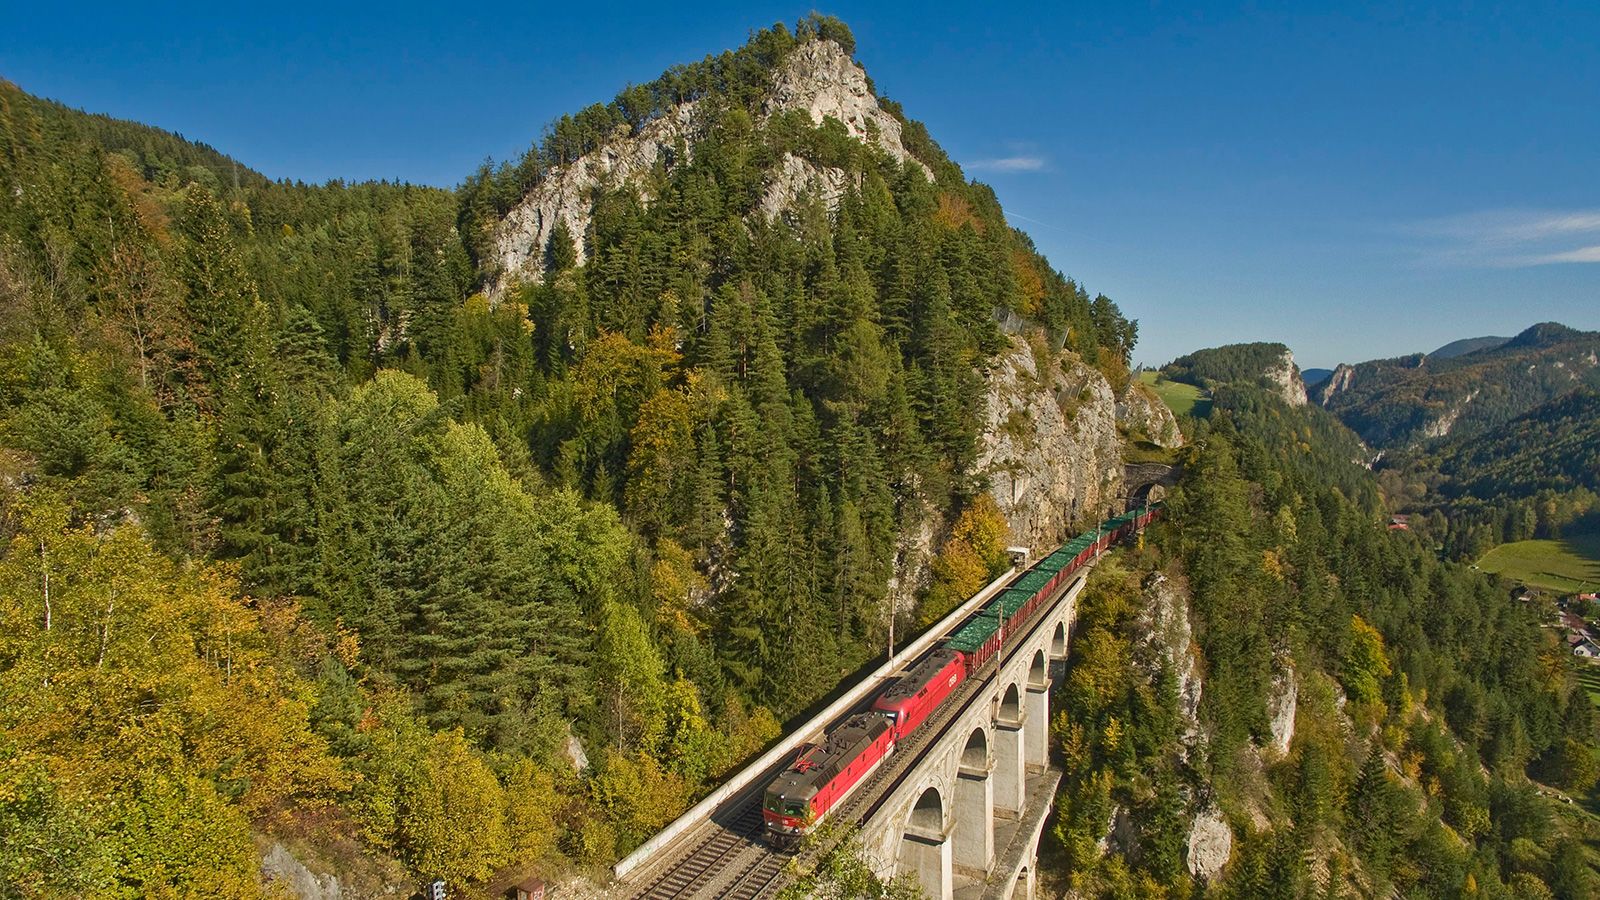 Top 10 Train Routes in Europe - Places To See In Your Lifetime